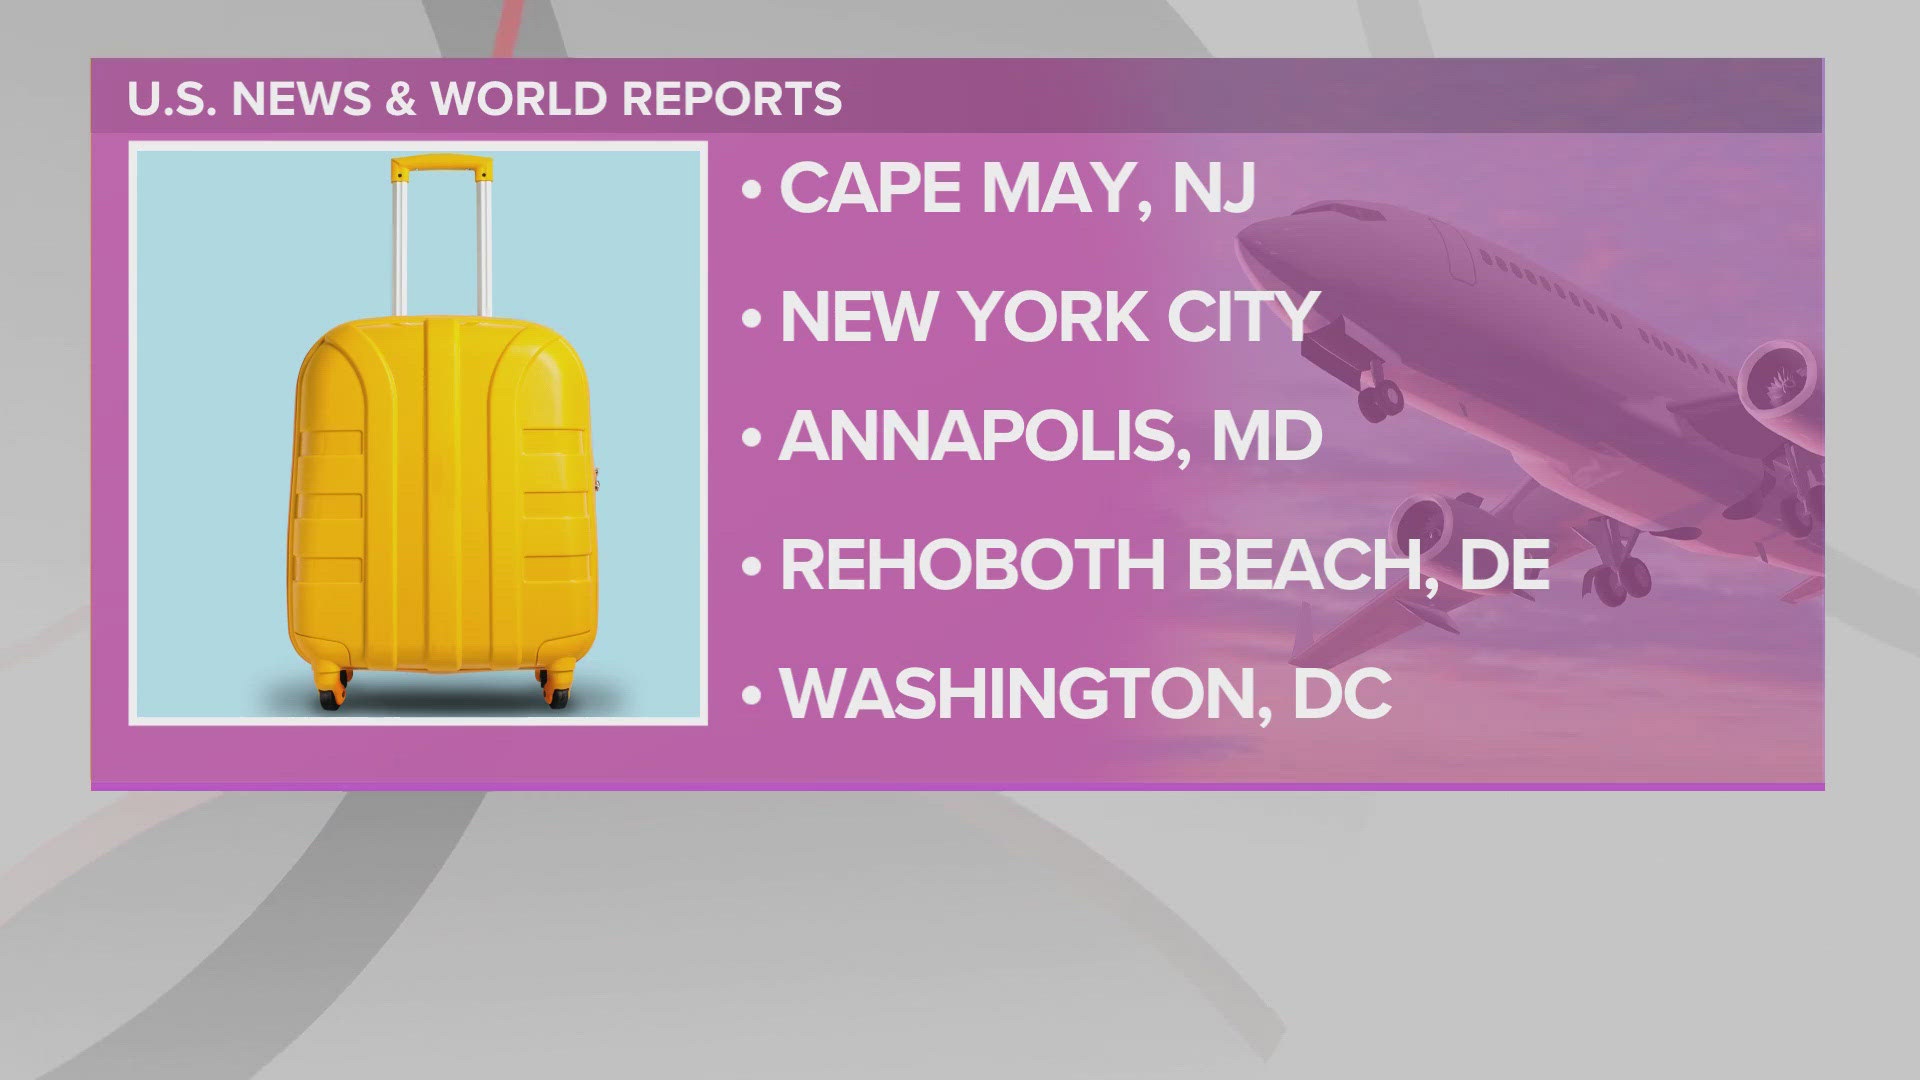 Looking to get away for Memorial Day? Here are the top places to travel to according to US News and World Report.